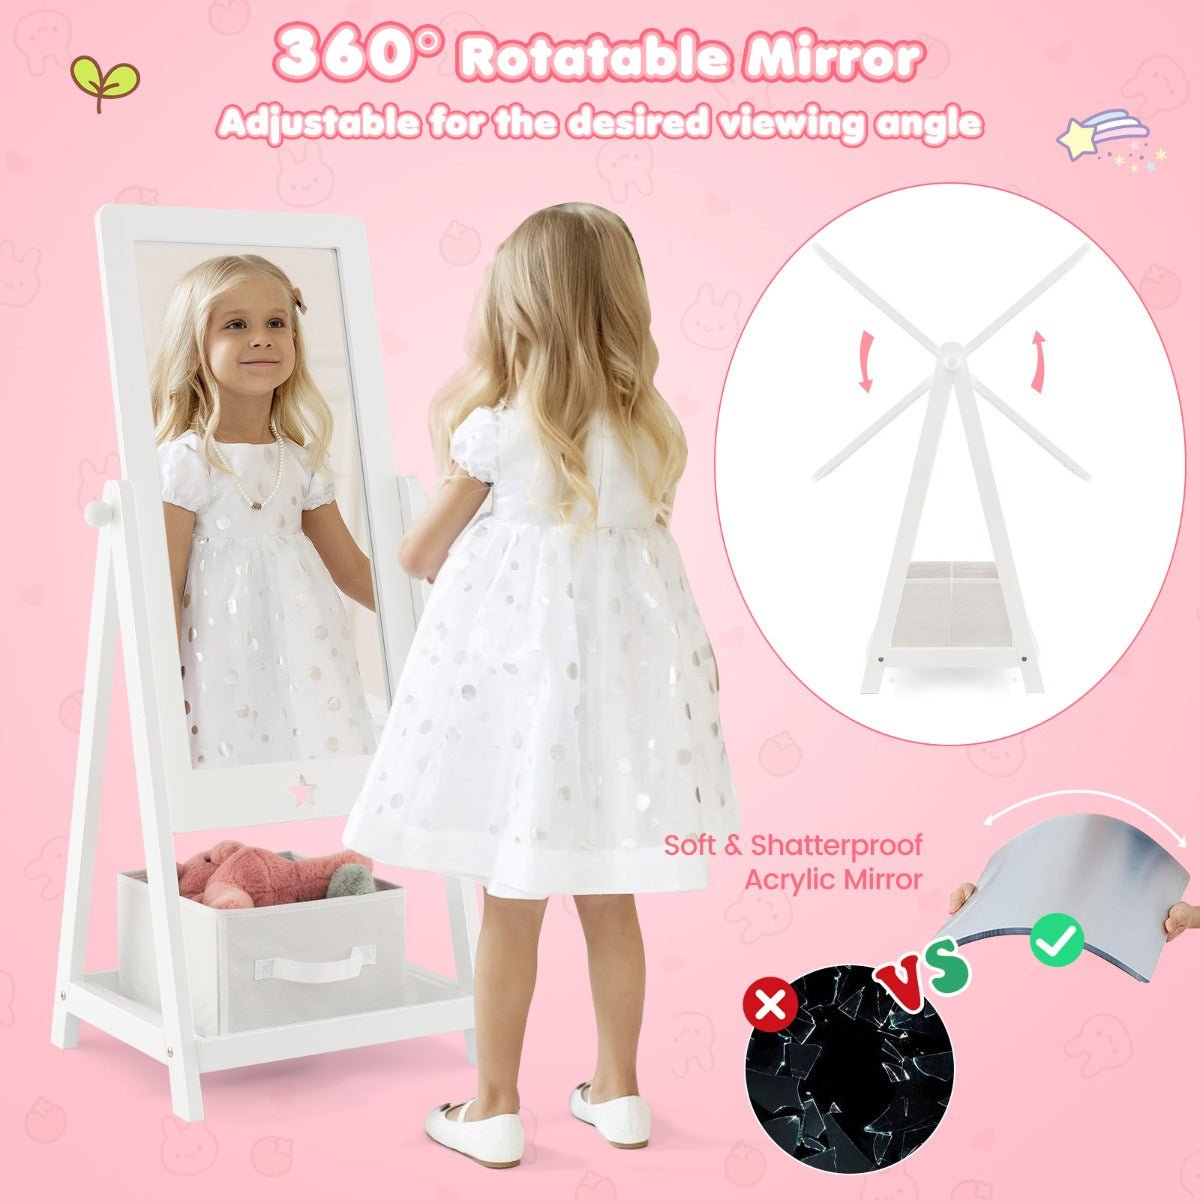 Dress Up Fun Begins with Our Kids Mirror - Buy Today!